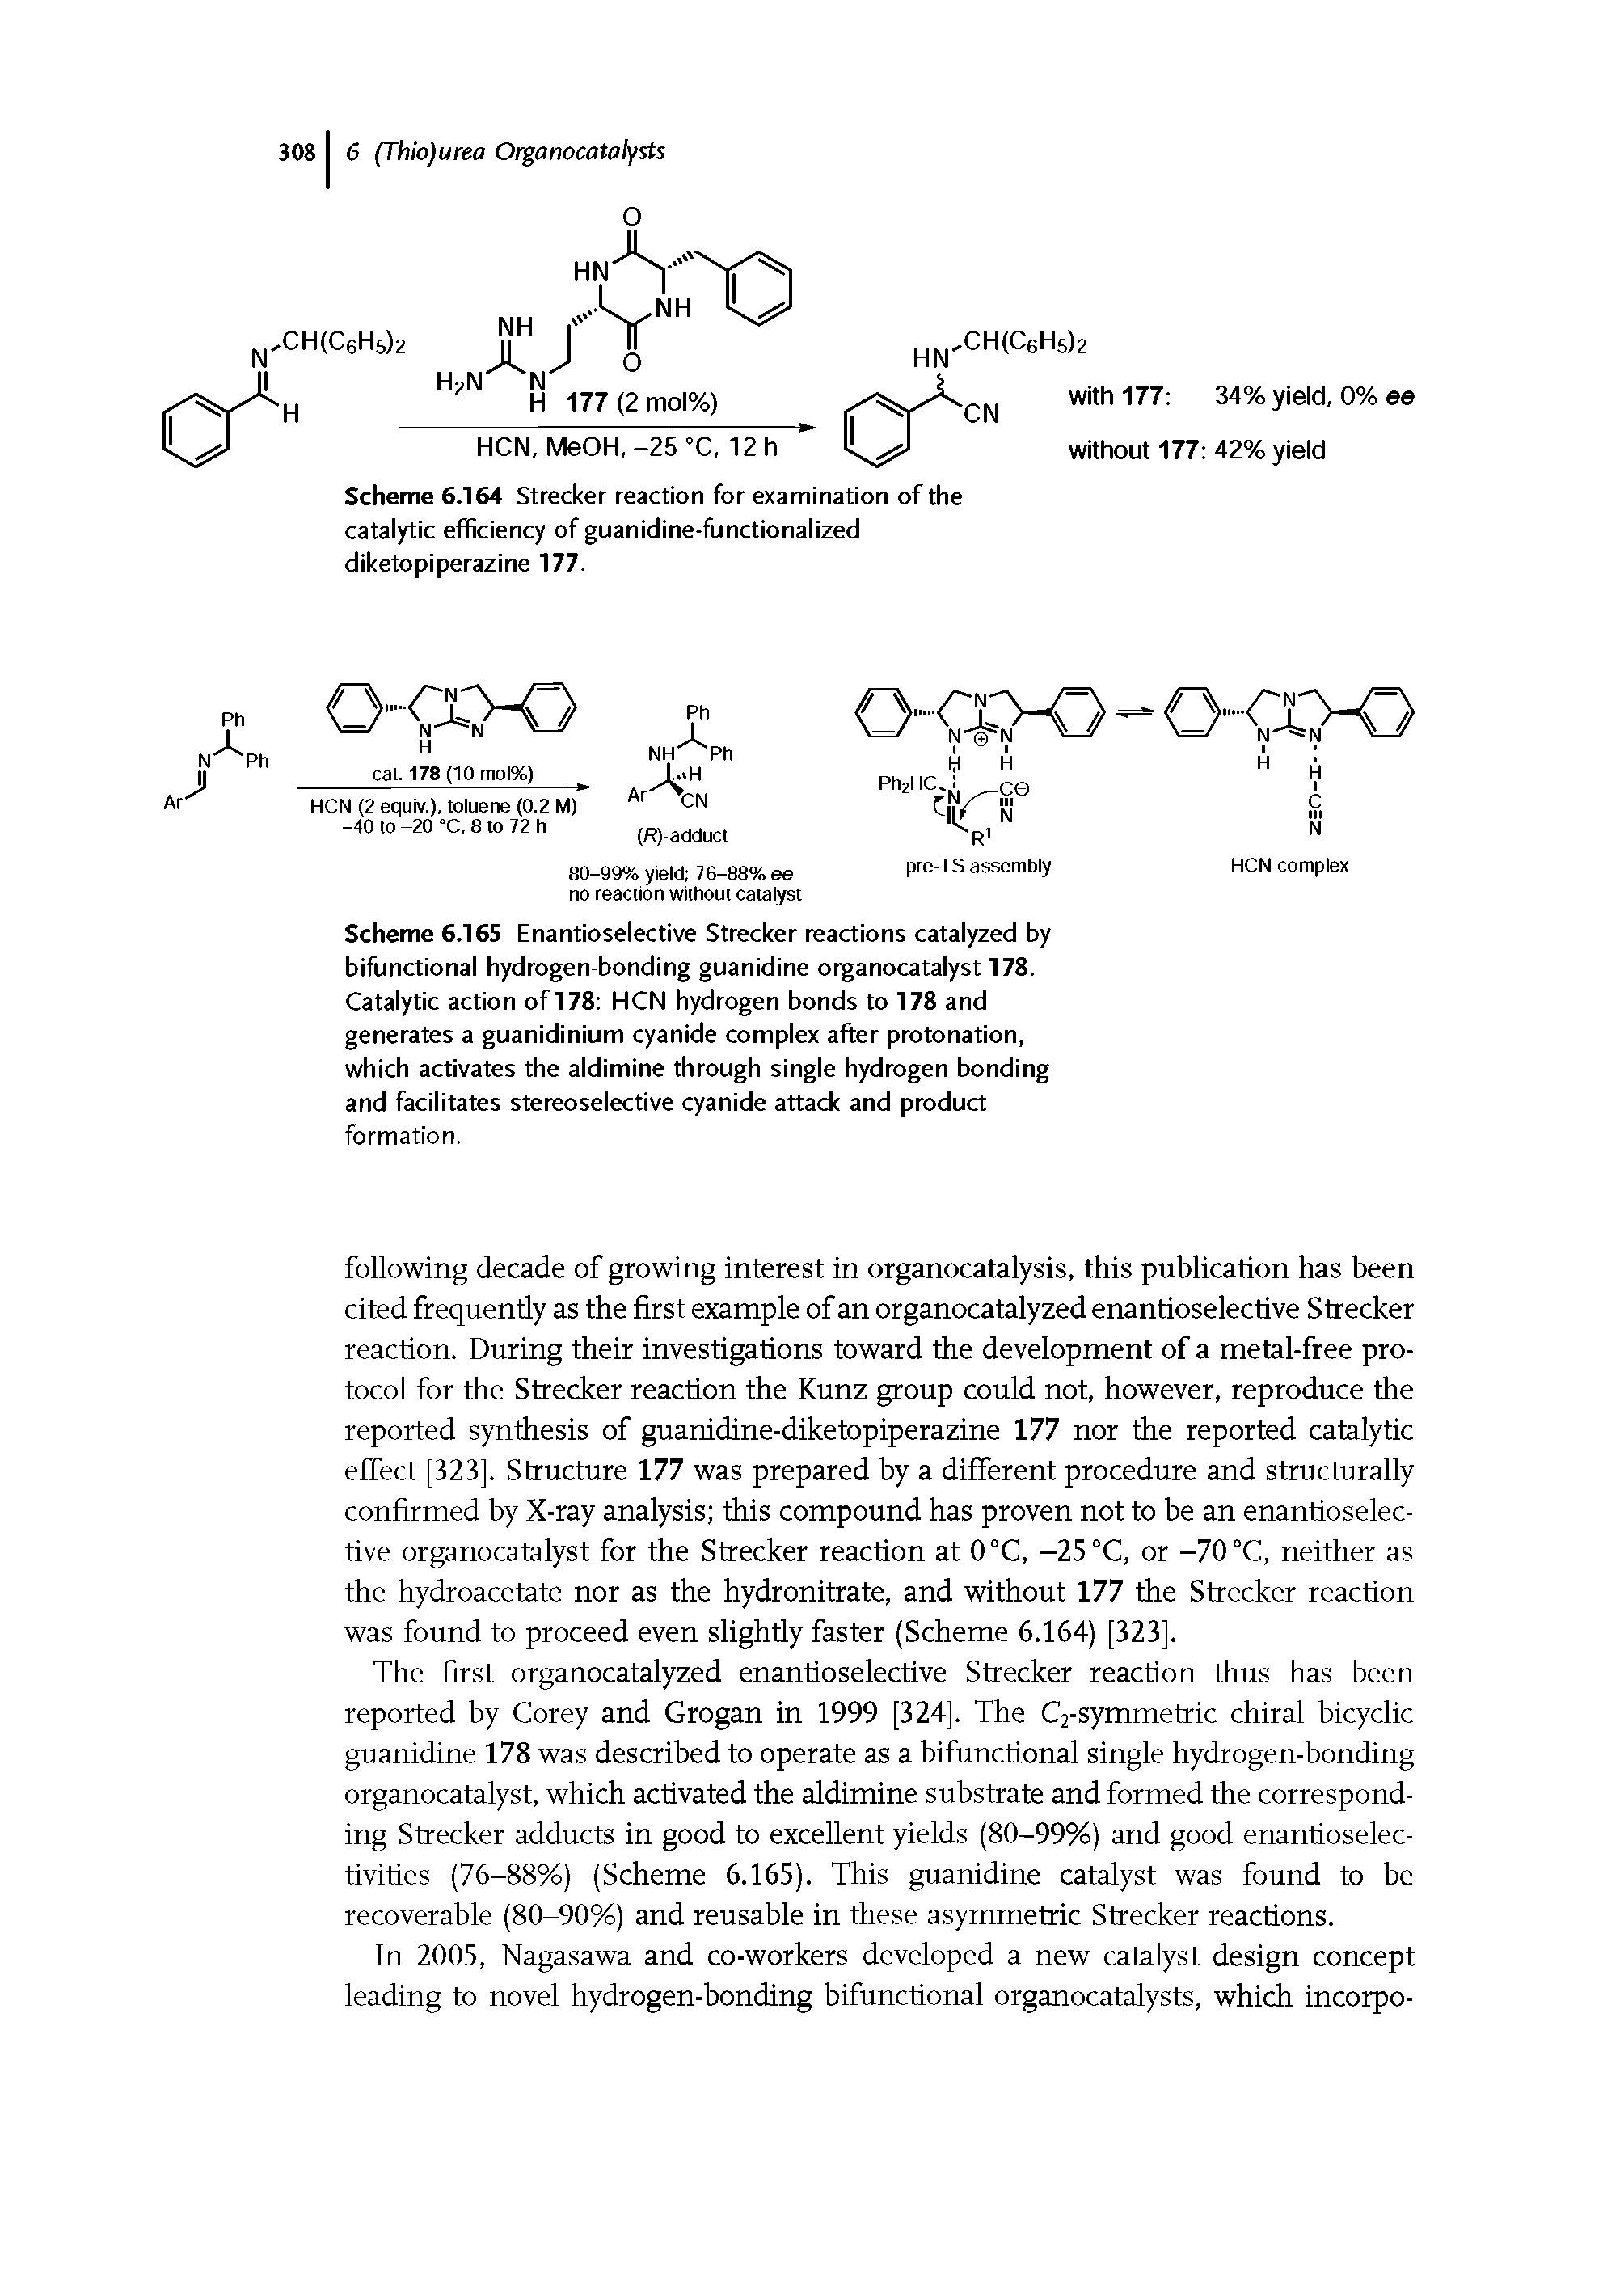 Scheme 6.165 Enantioselective Strecker reactions catalyzed by biflinctional hydrogen-bonding guanidine organocatalyst 178. Catalytic action of 178 HCN hydrogen bonds to 178 and generates a guanidinium cyanide complex after protonation, which activates the aldimine through single hydrogen bonding and facilitates stereoselective cyanide attack and product formation.